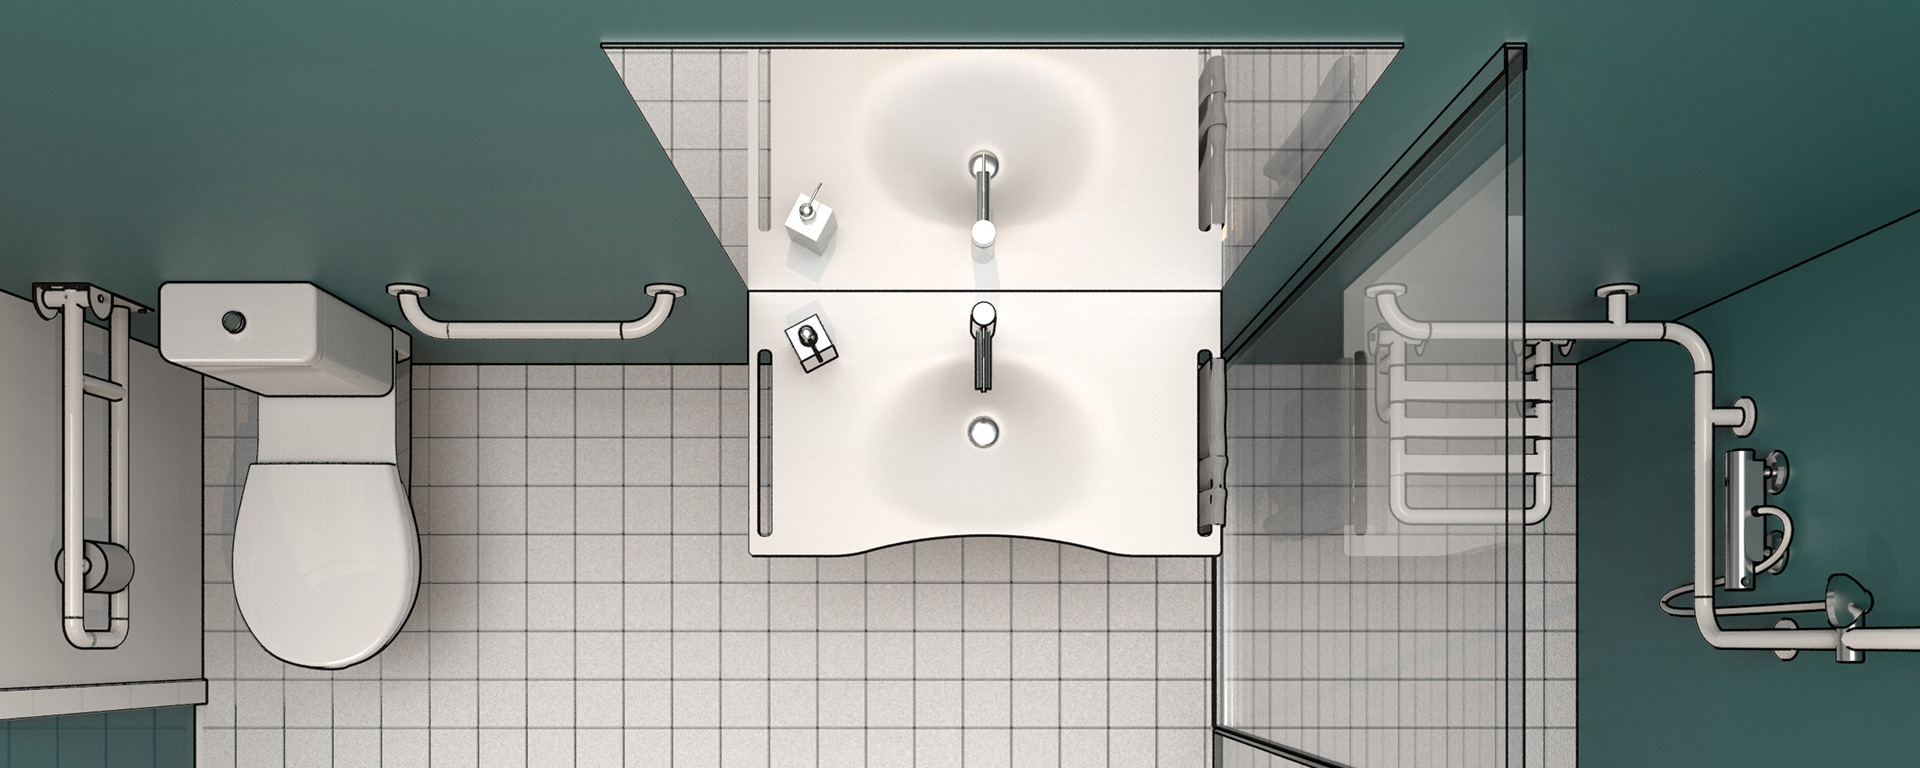 Designing an assisted bathroom